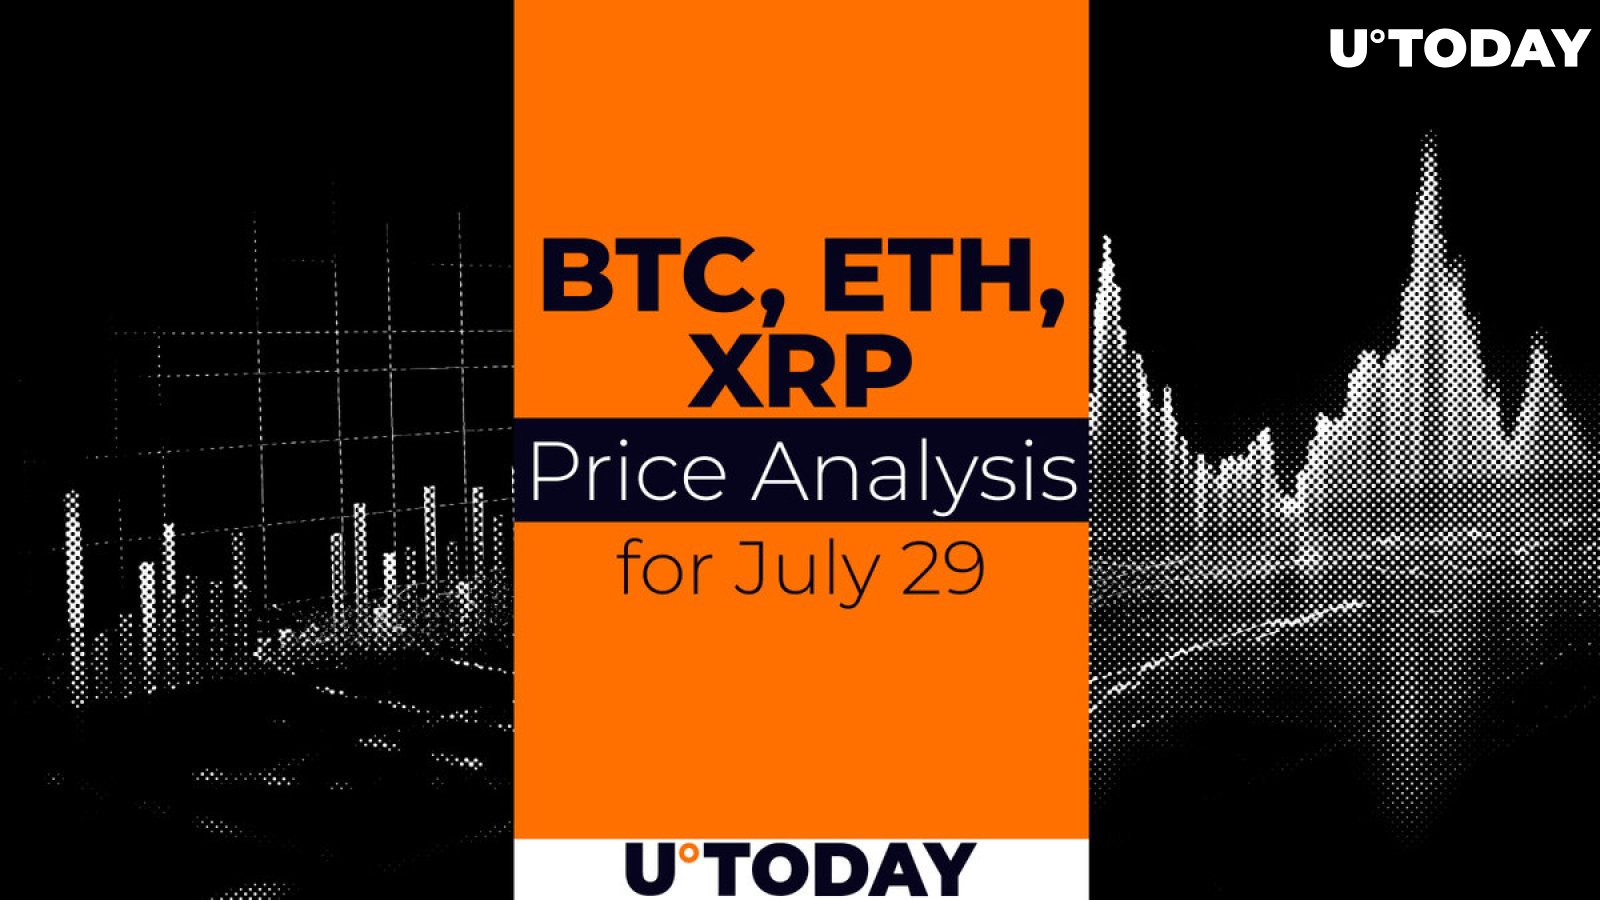 BTC, ETH and XRP Prediction for July 29